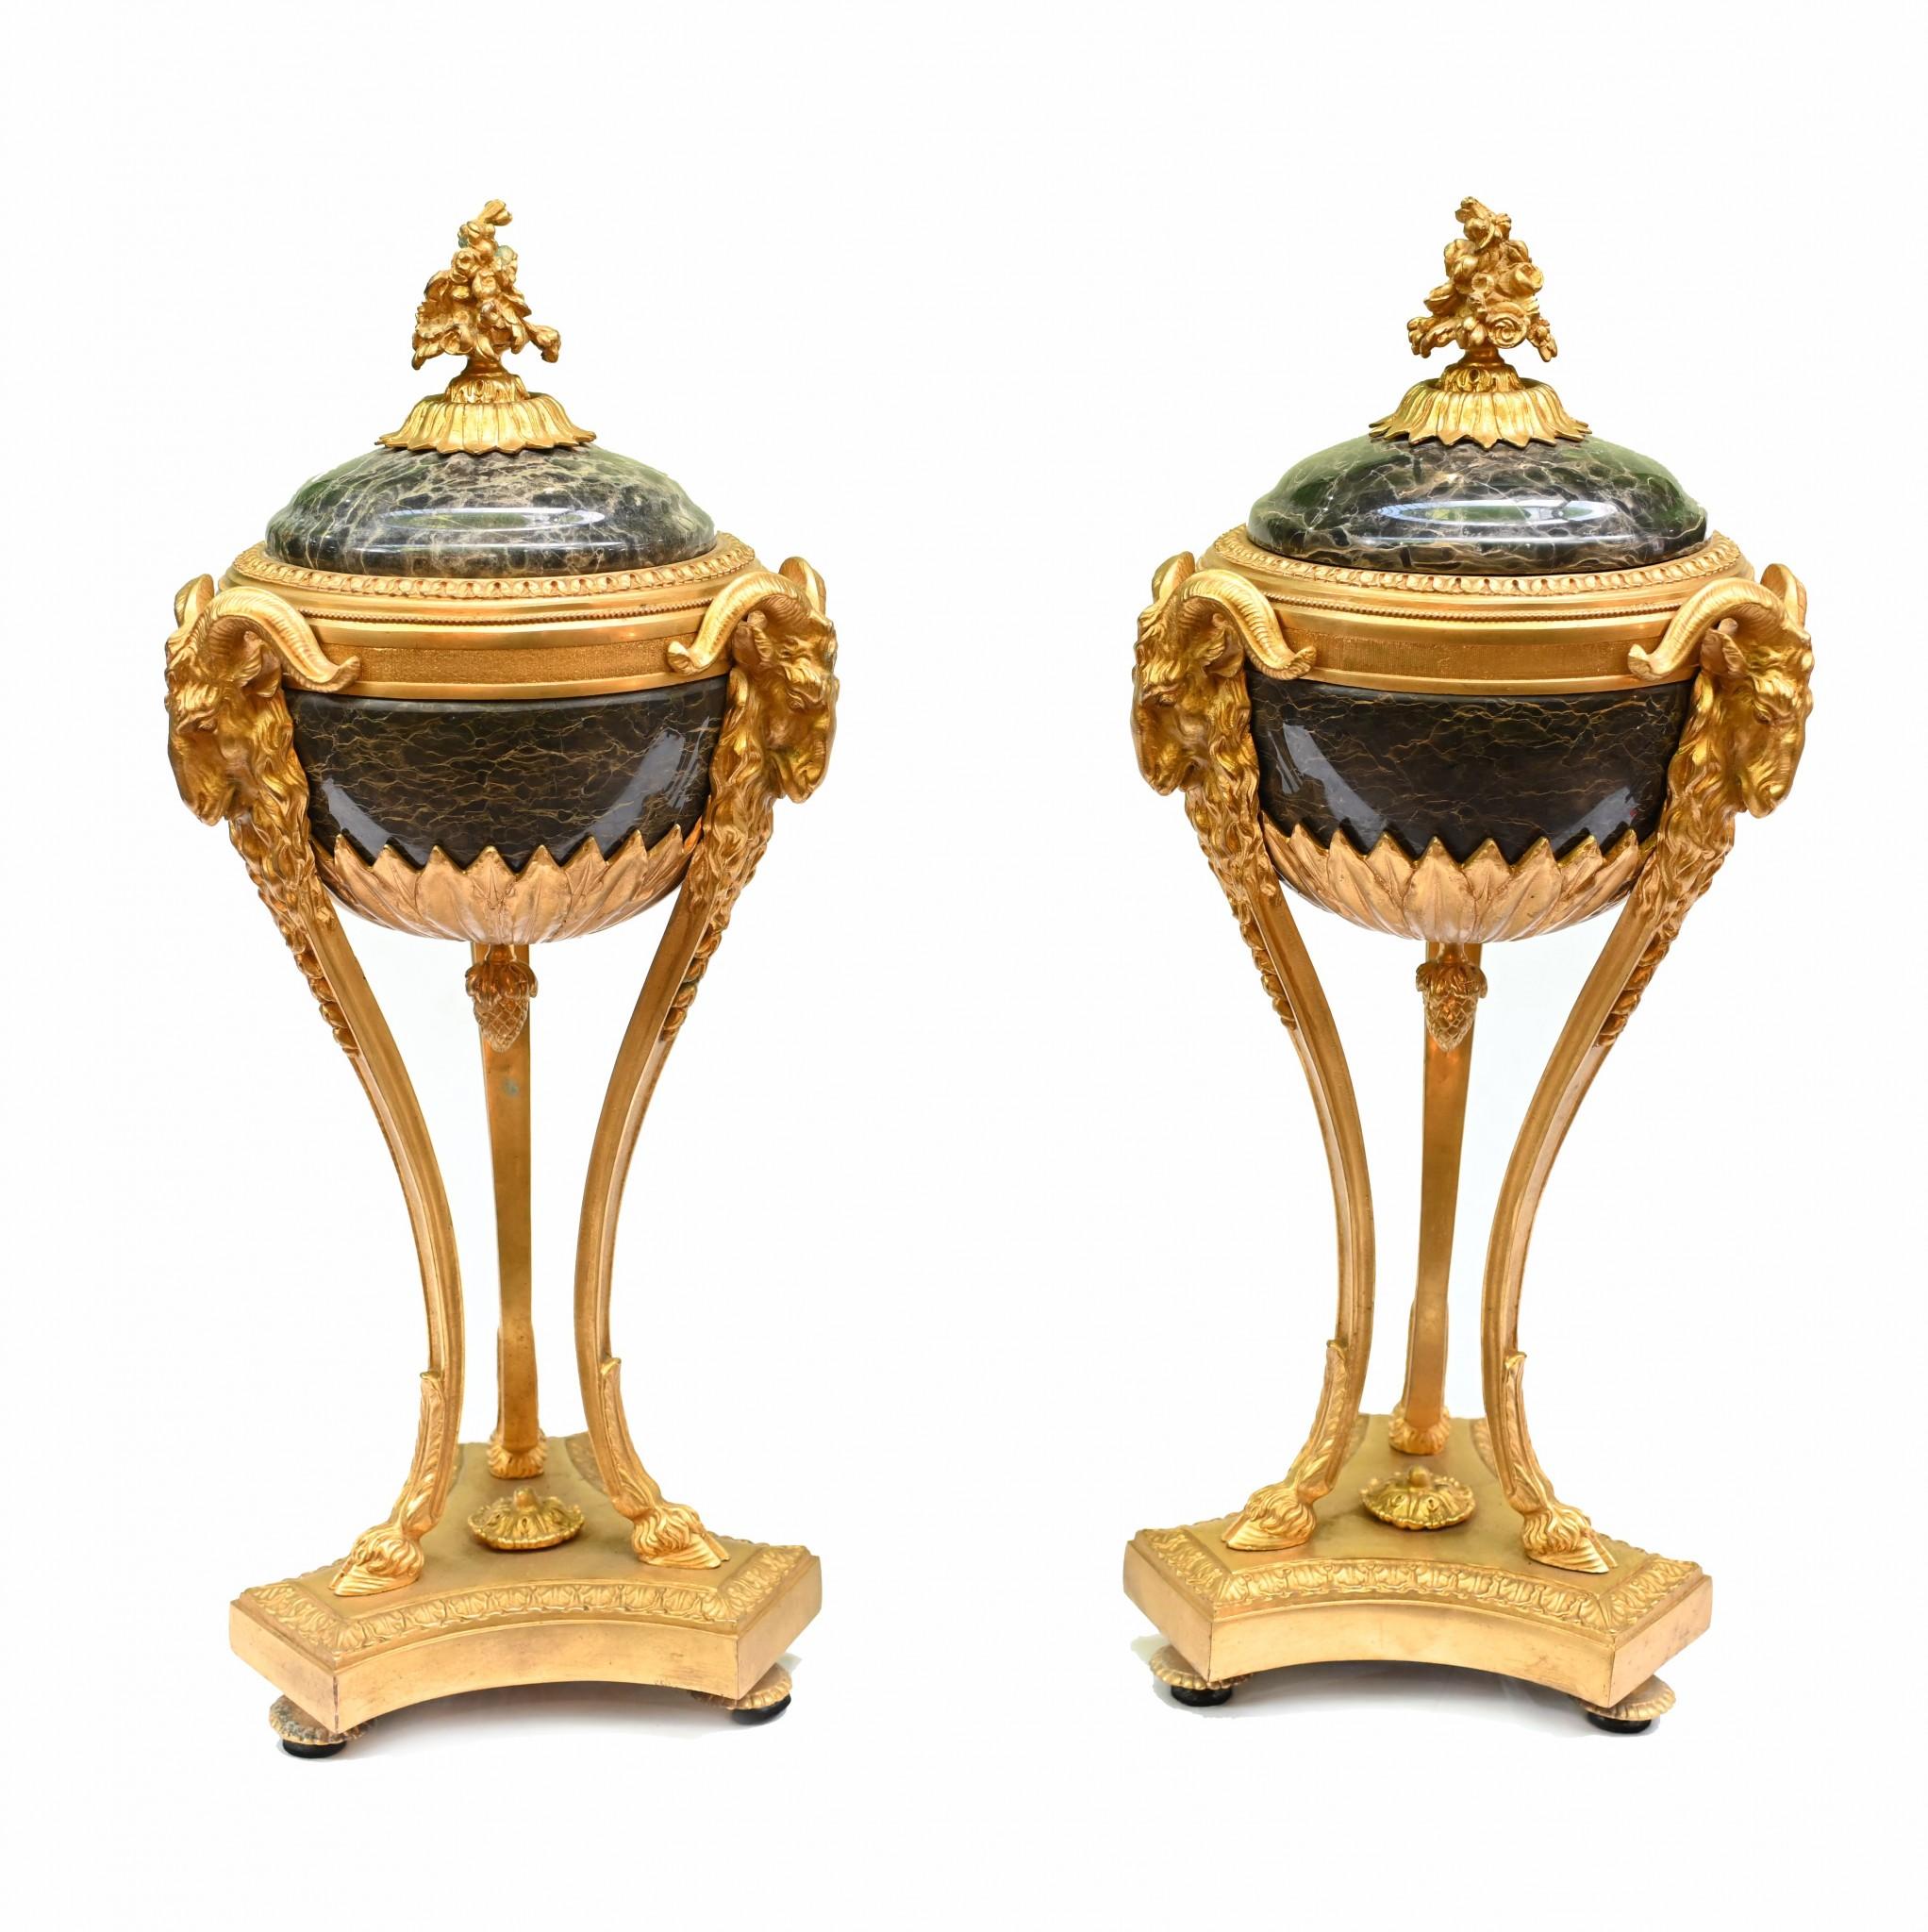 Pair Marble Cassolettes Stands Marble Vases Gilt Rams Heads 1880 In Good Condition For Sale In Potters Bar, GB